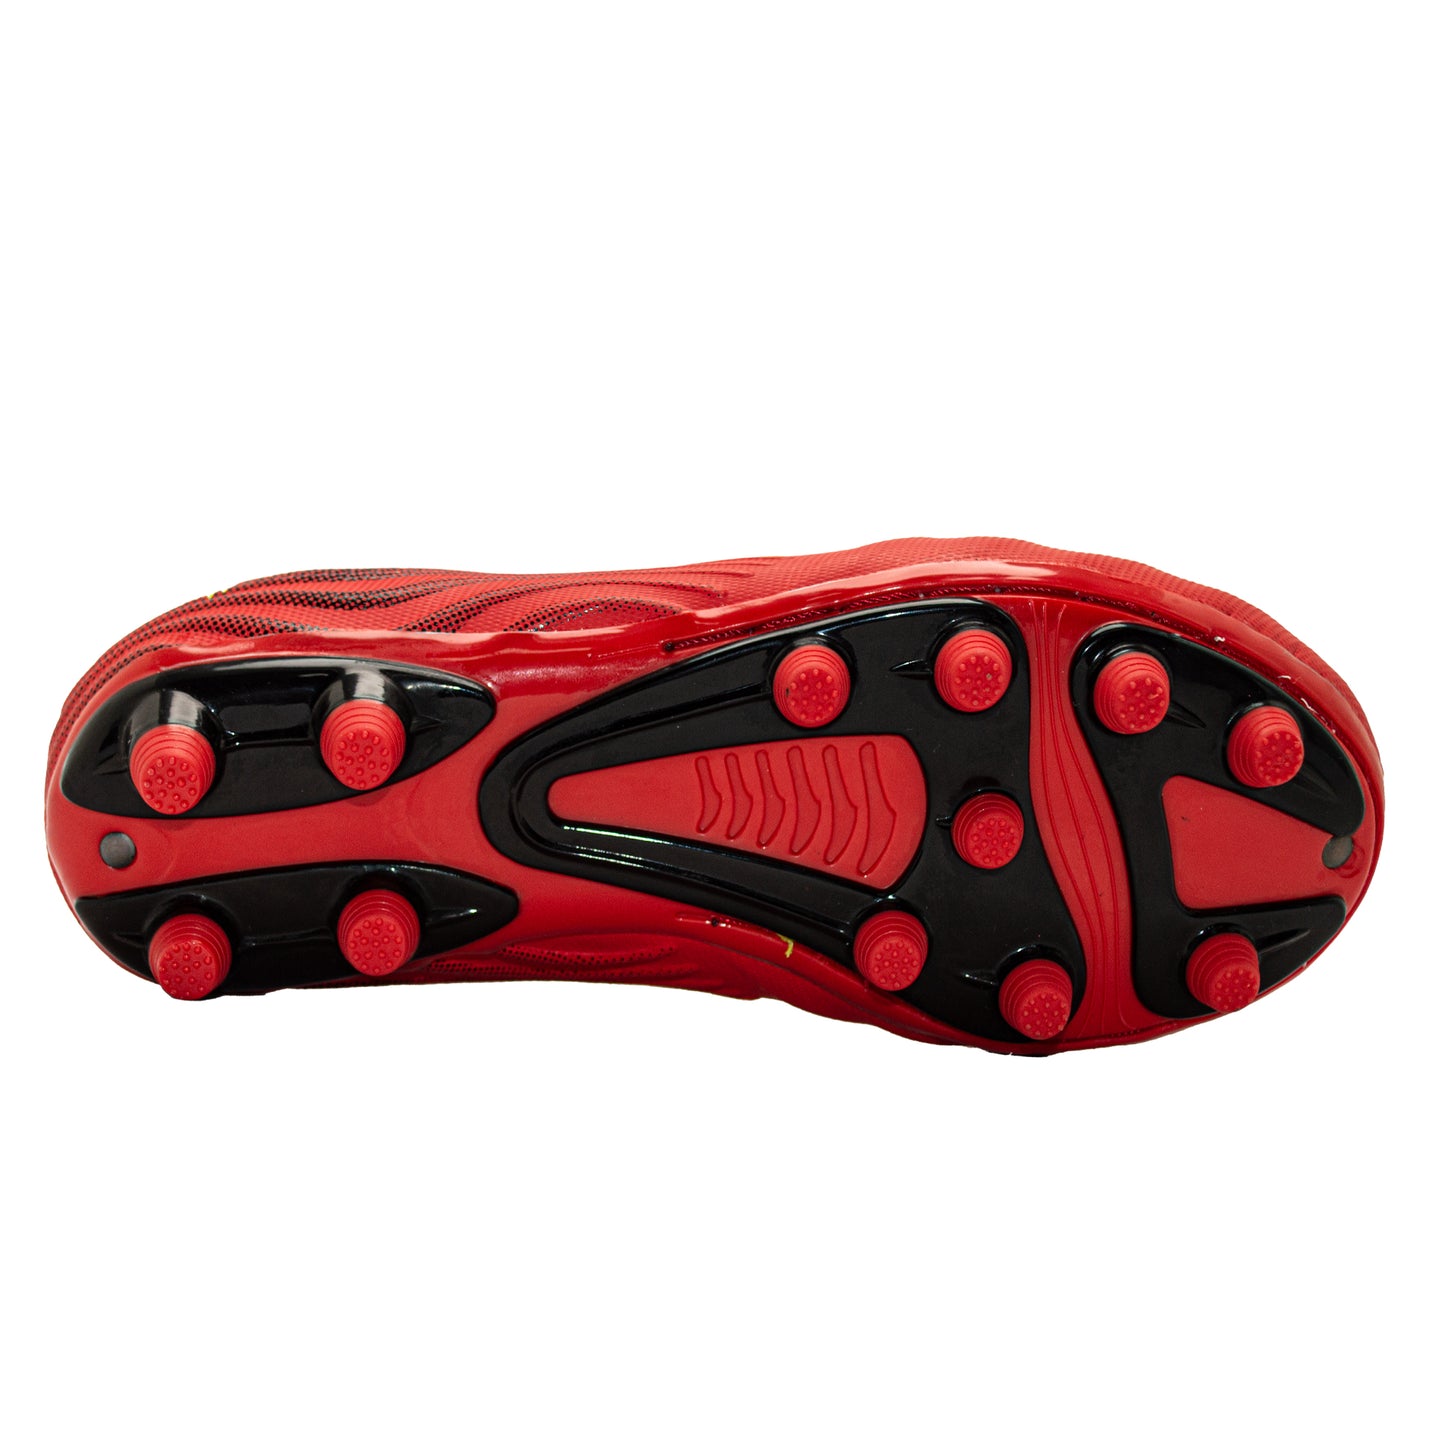 Swell Senior Football Boots - Red/Black/Yellow